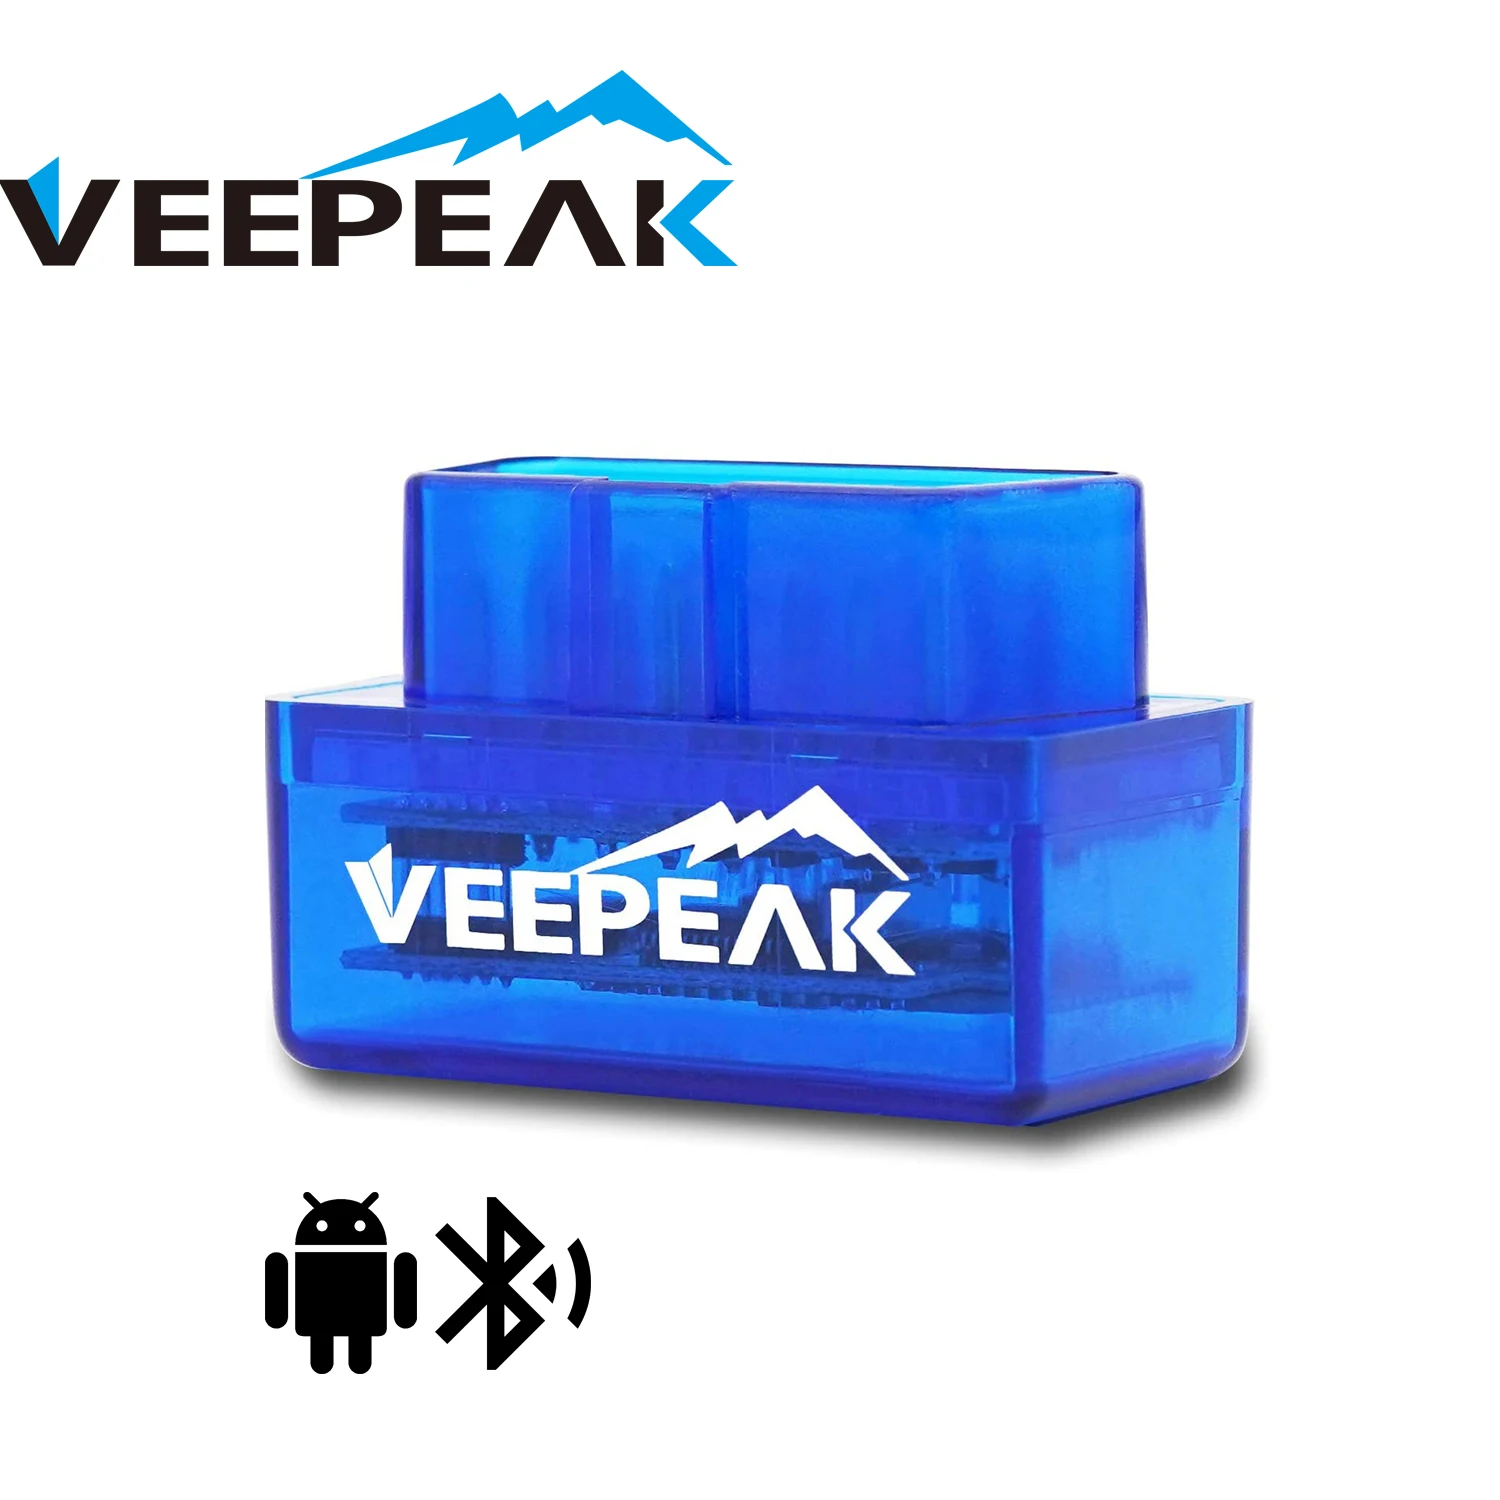 Veepeak Mini Bluetooth OBD2 Scanner for Android, Car OBD II Diagnostic Scan Tool Check Engine Light Code Reader, Supports Torque elm327 bluetooth v1 5 obd2 hh obd v2 1 car scanner obdii automotive diagnostic chip bluetooth auto fault detector free express